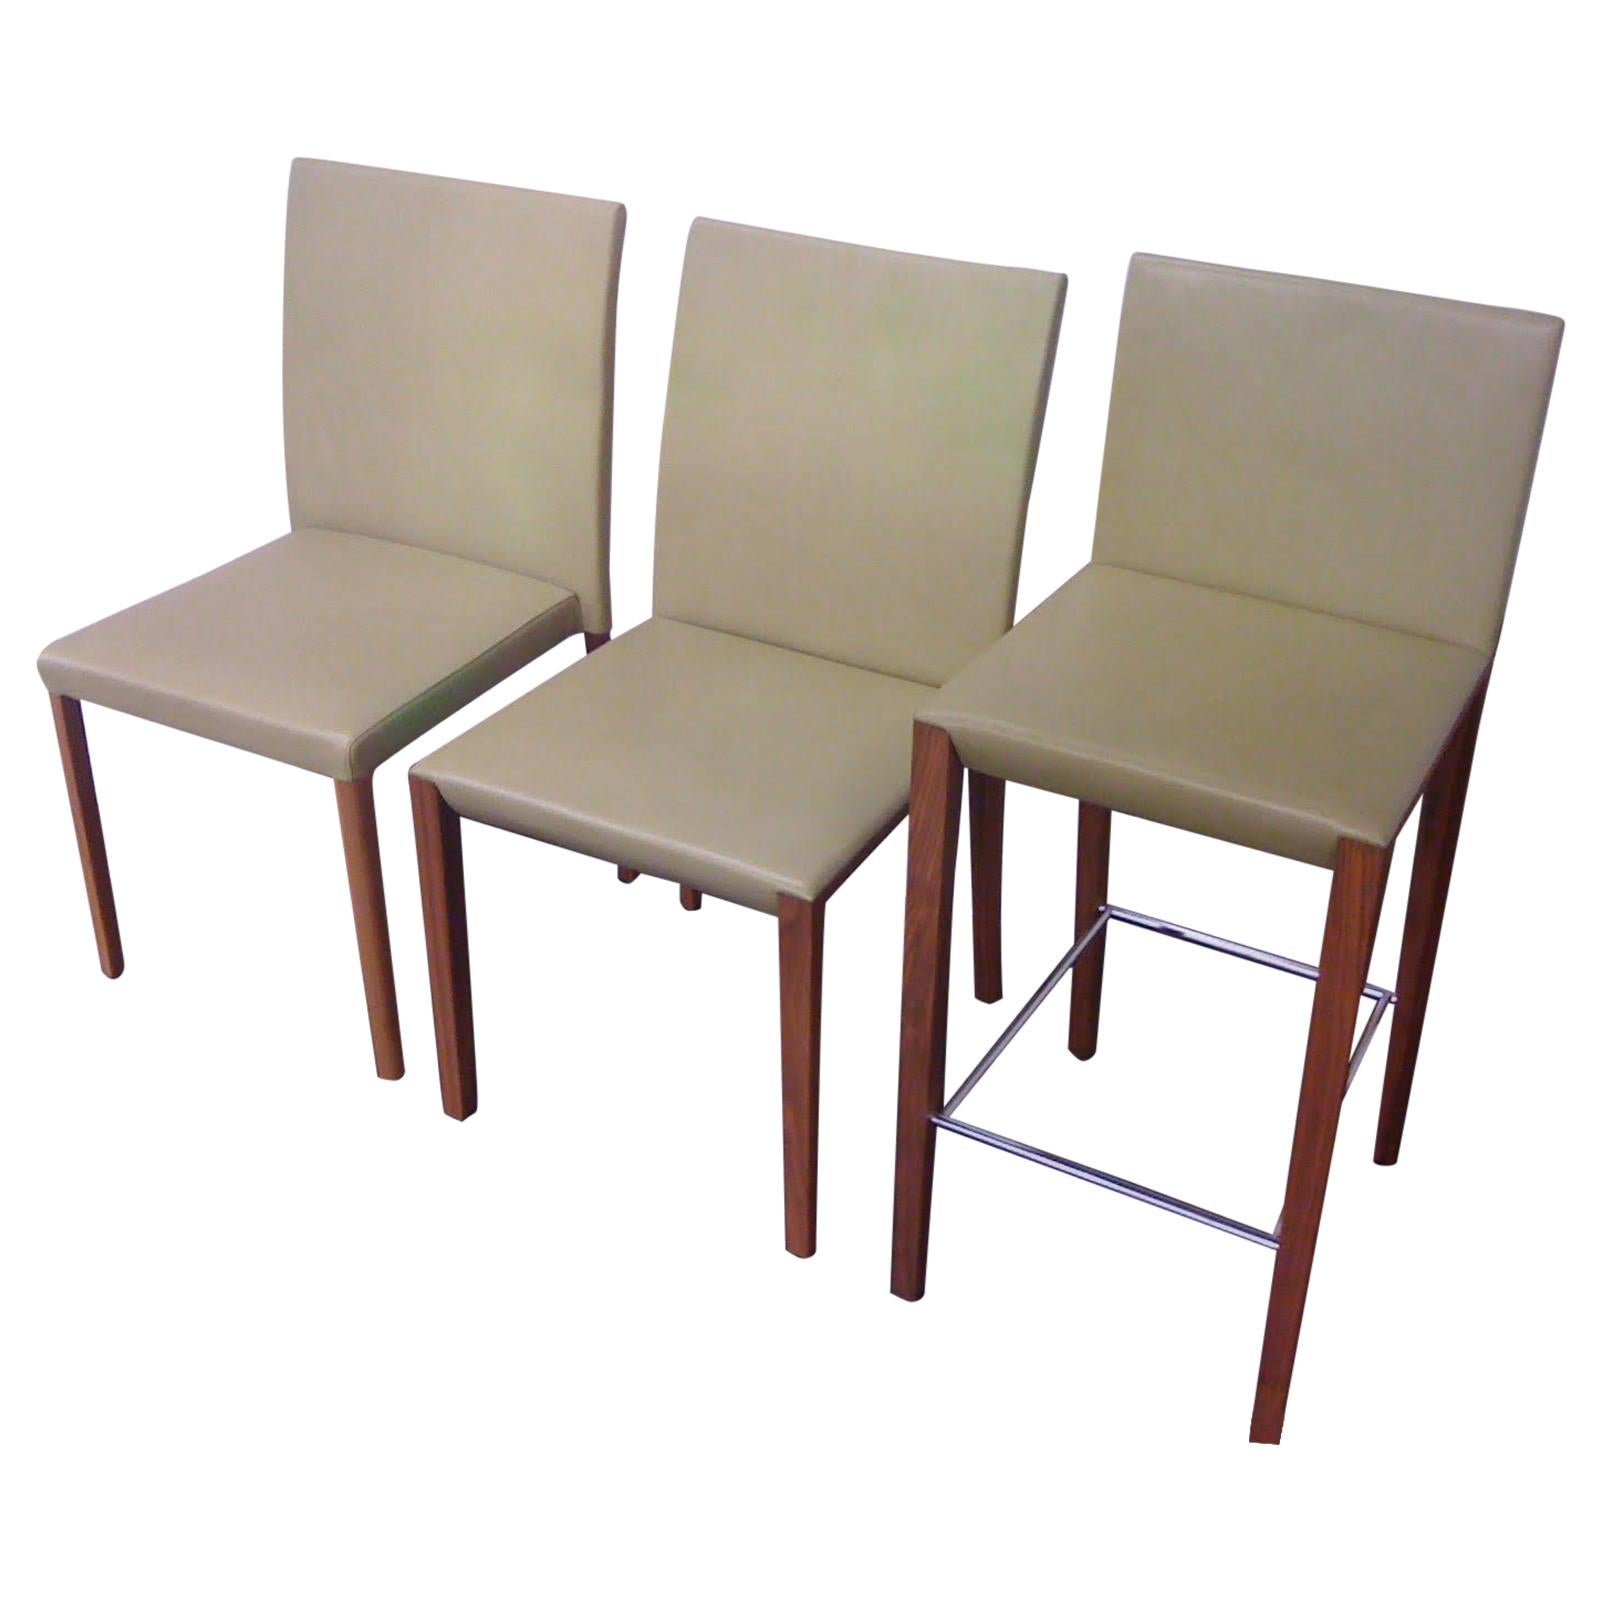 Set of Andoo Chairs and Counter Stools in Leather with Walnut Legs